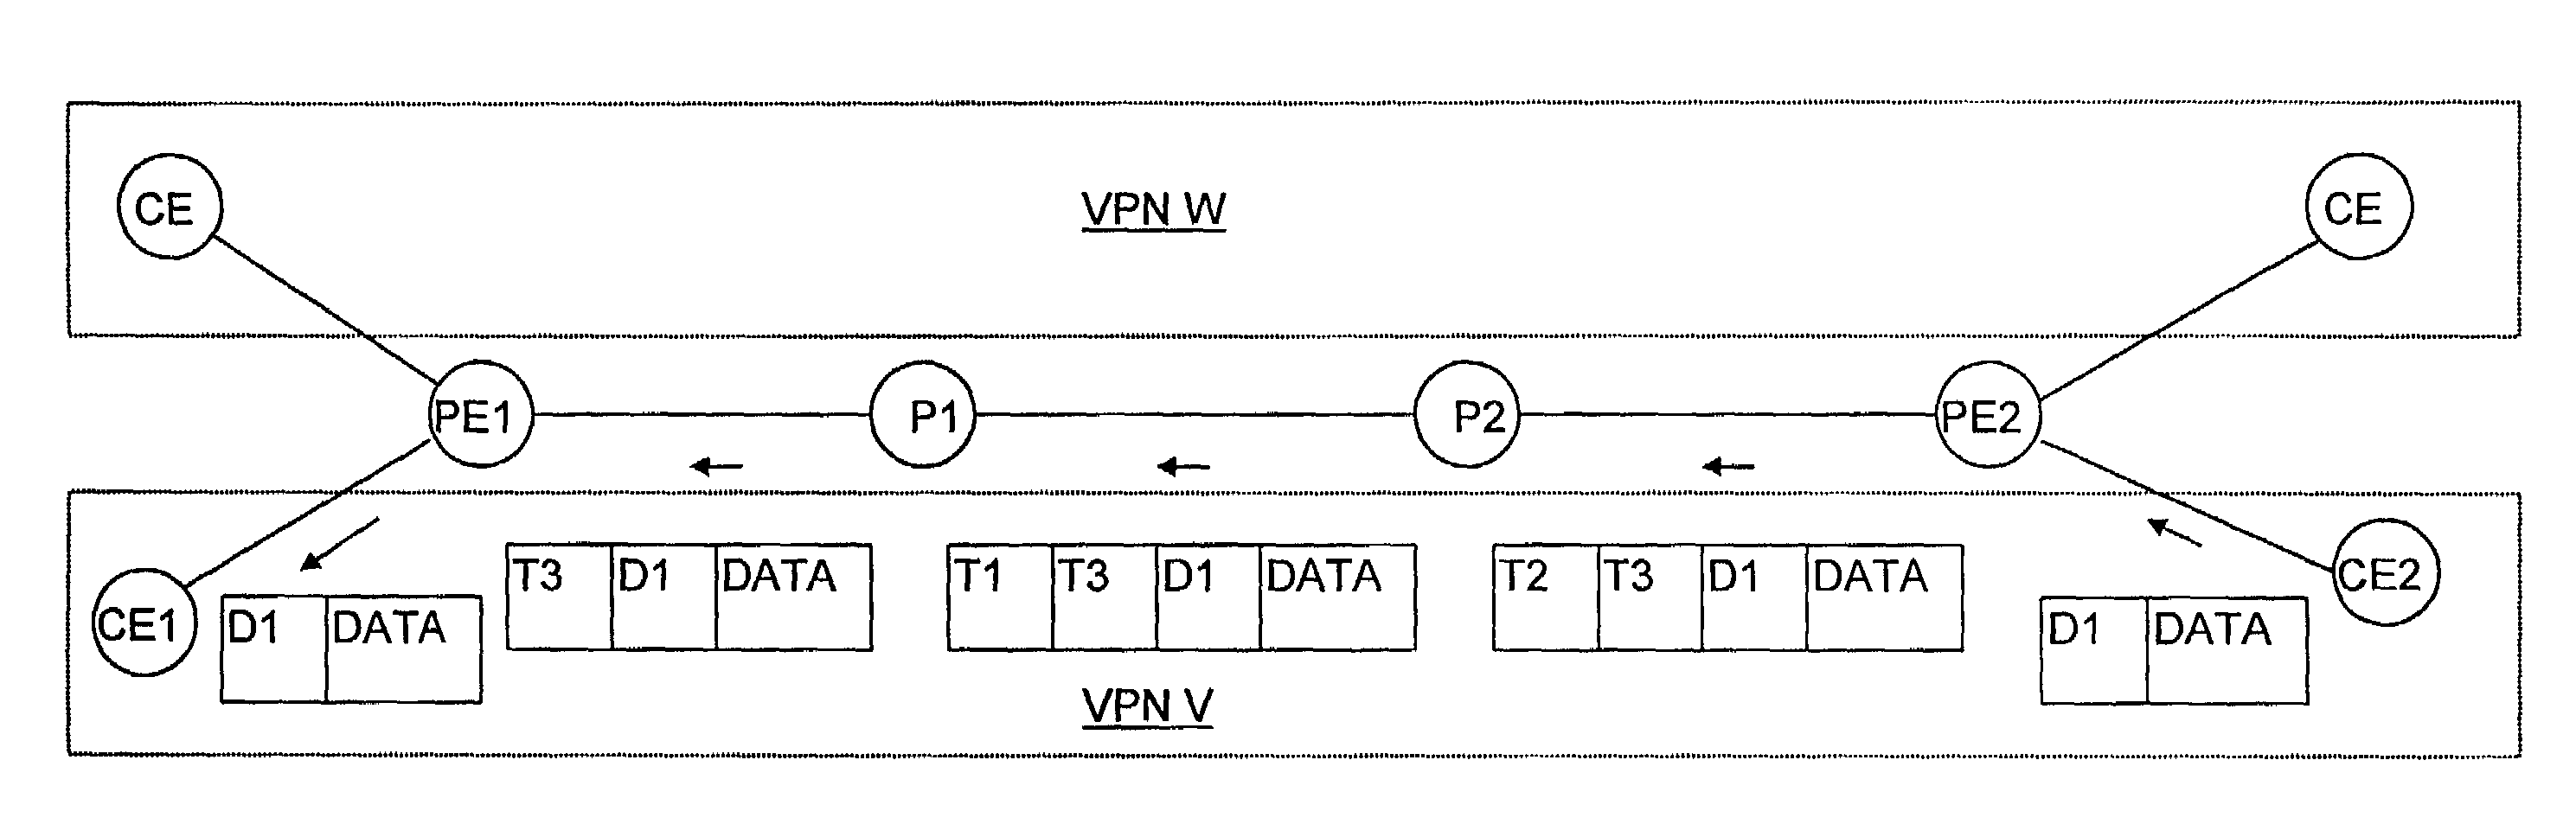 Peer-model support for virtual private networks having potentially overlapping addresses